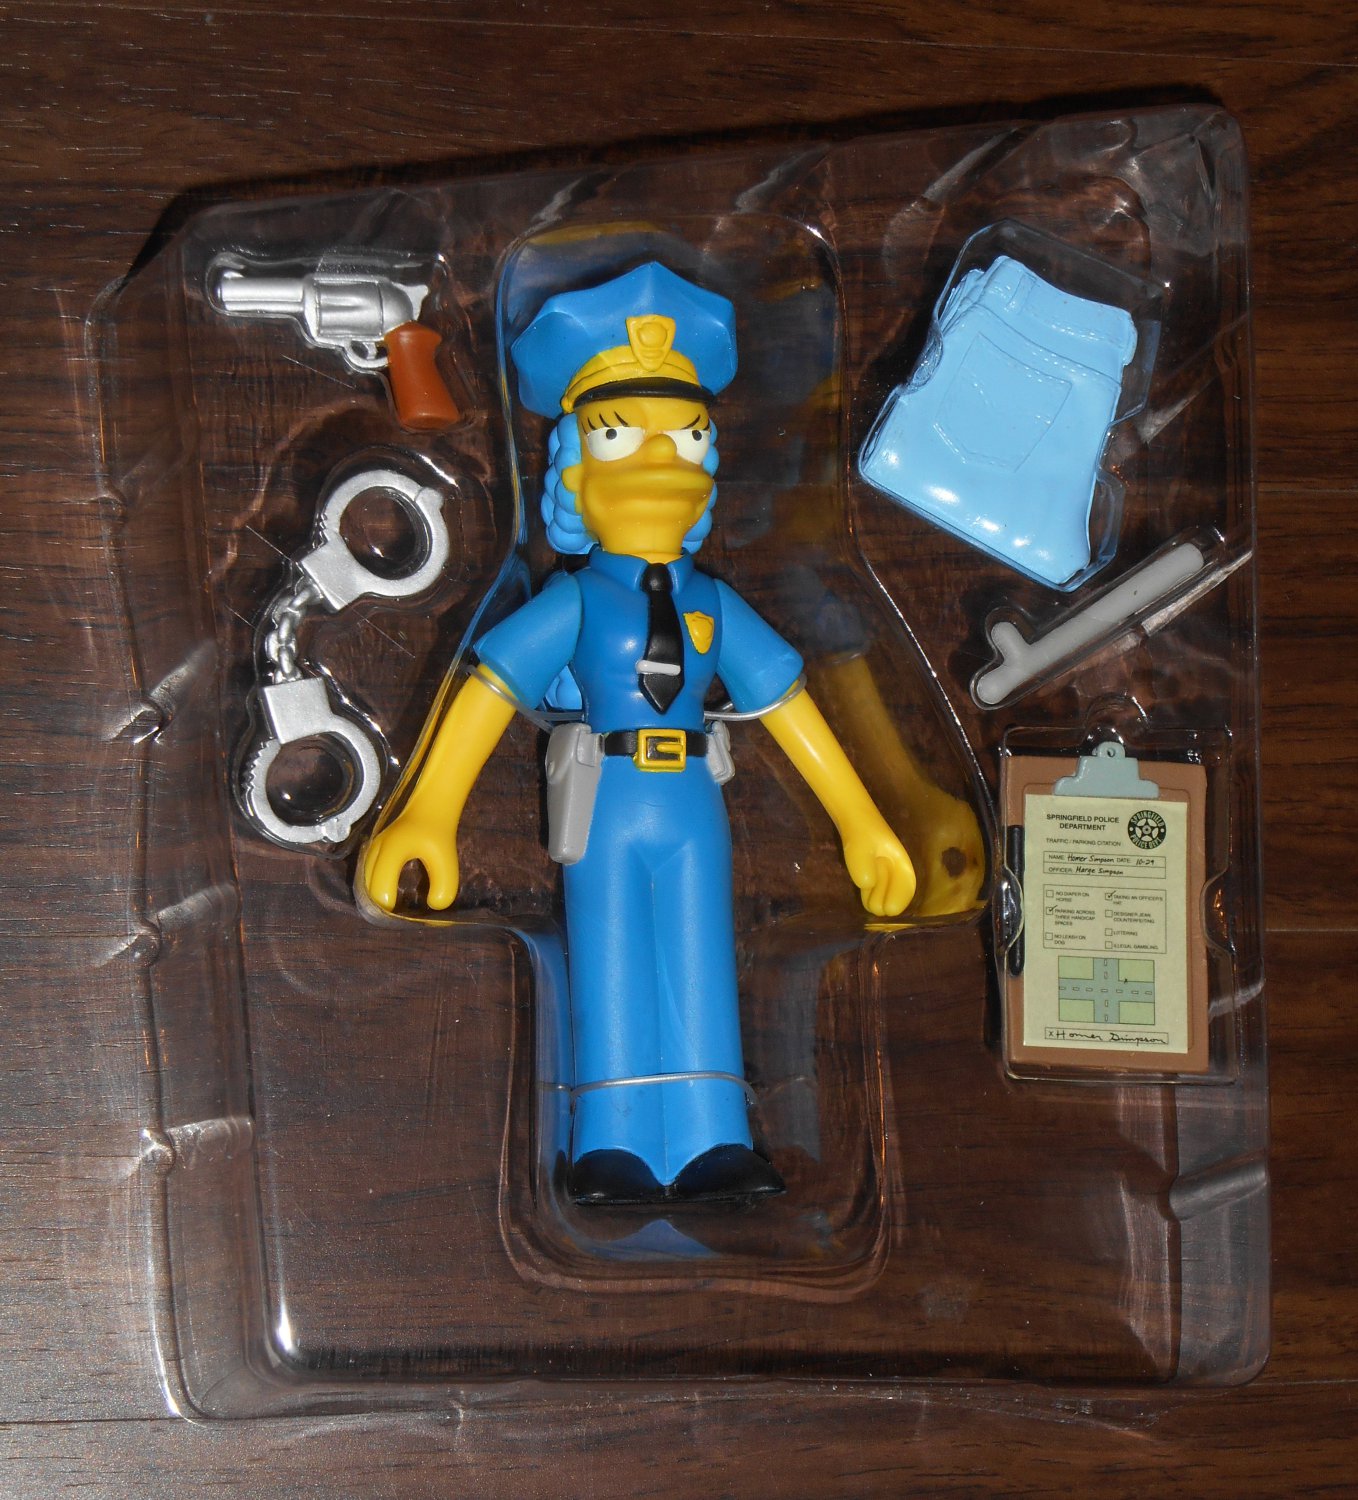 Officer Marge Series 7 WOS Interactive Figure The Simpsons TV Show Playmates World of Springfield